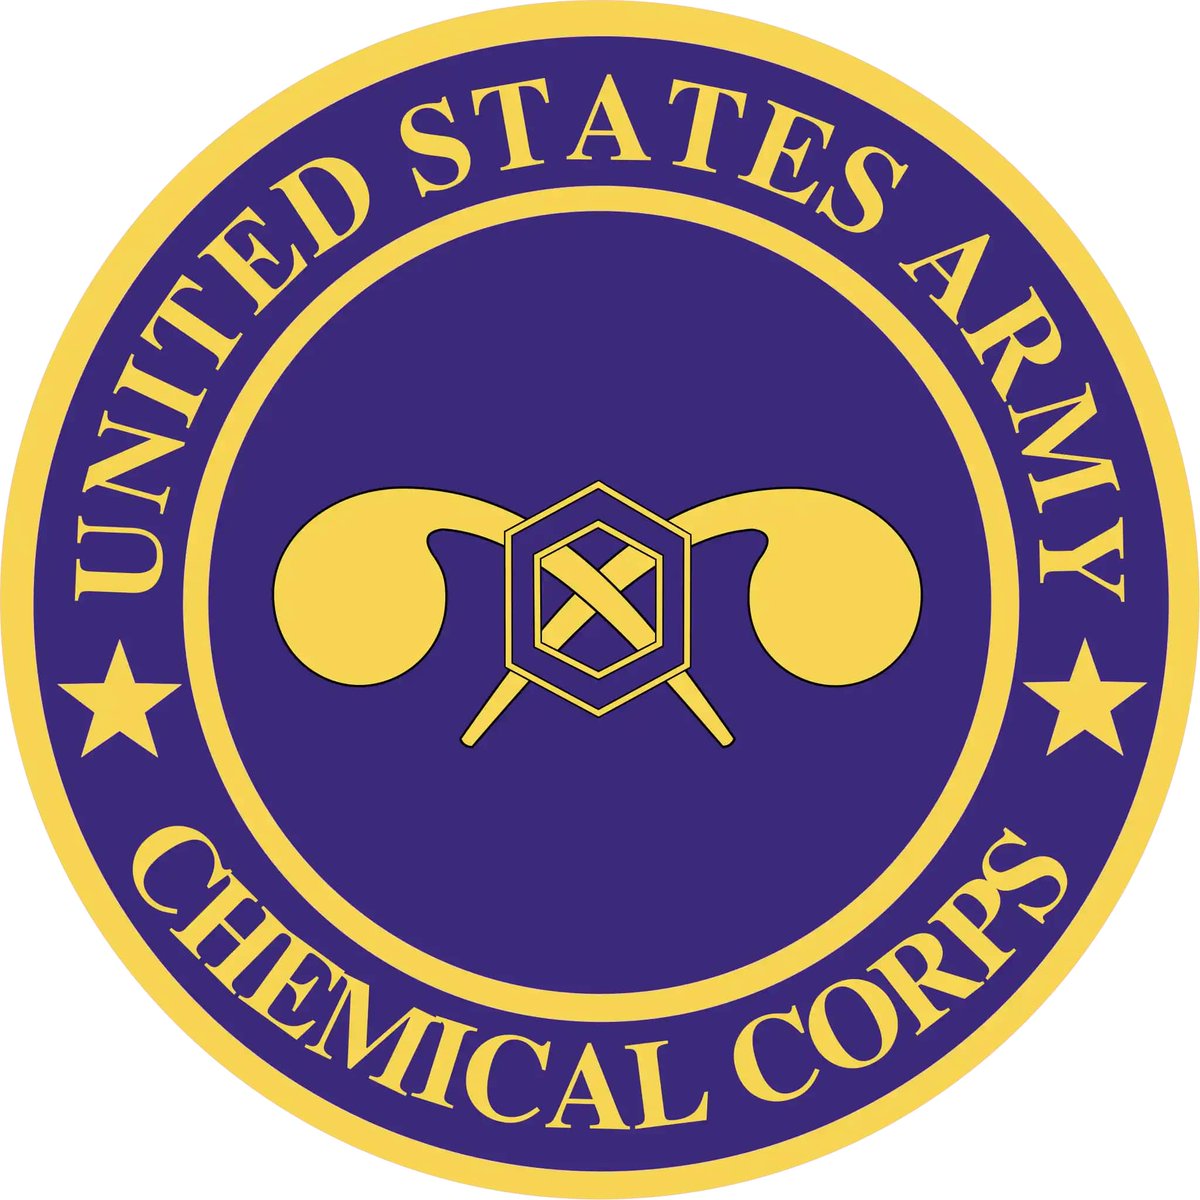 28 JUNE 1918 –U.S. ARMY CHEMICAL CORPS BRANCH BIRTHDAY

Established as the U.S. Chemical Warfare Service (CWS) on 28 JUN 1918, the Chemical Corps was originally tasked with the deployment of chemical weapons during WWI.

#Armyhistory #TRADOC #USArmy #WW1 #WW1History